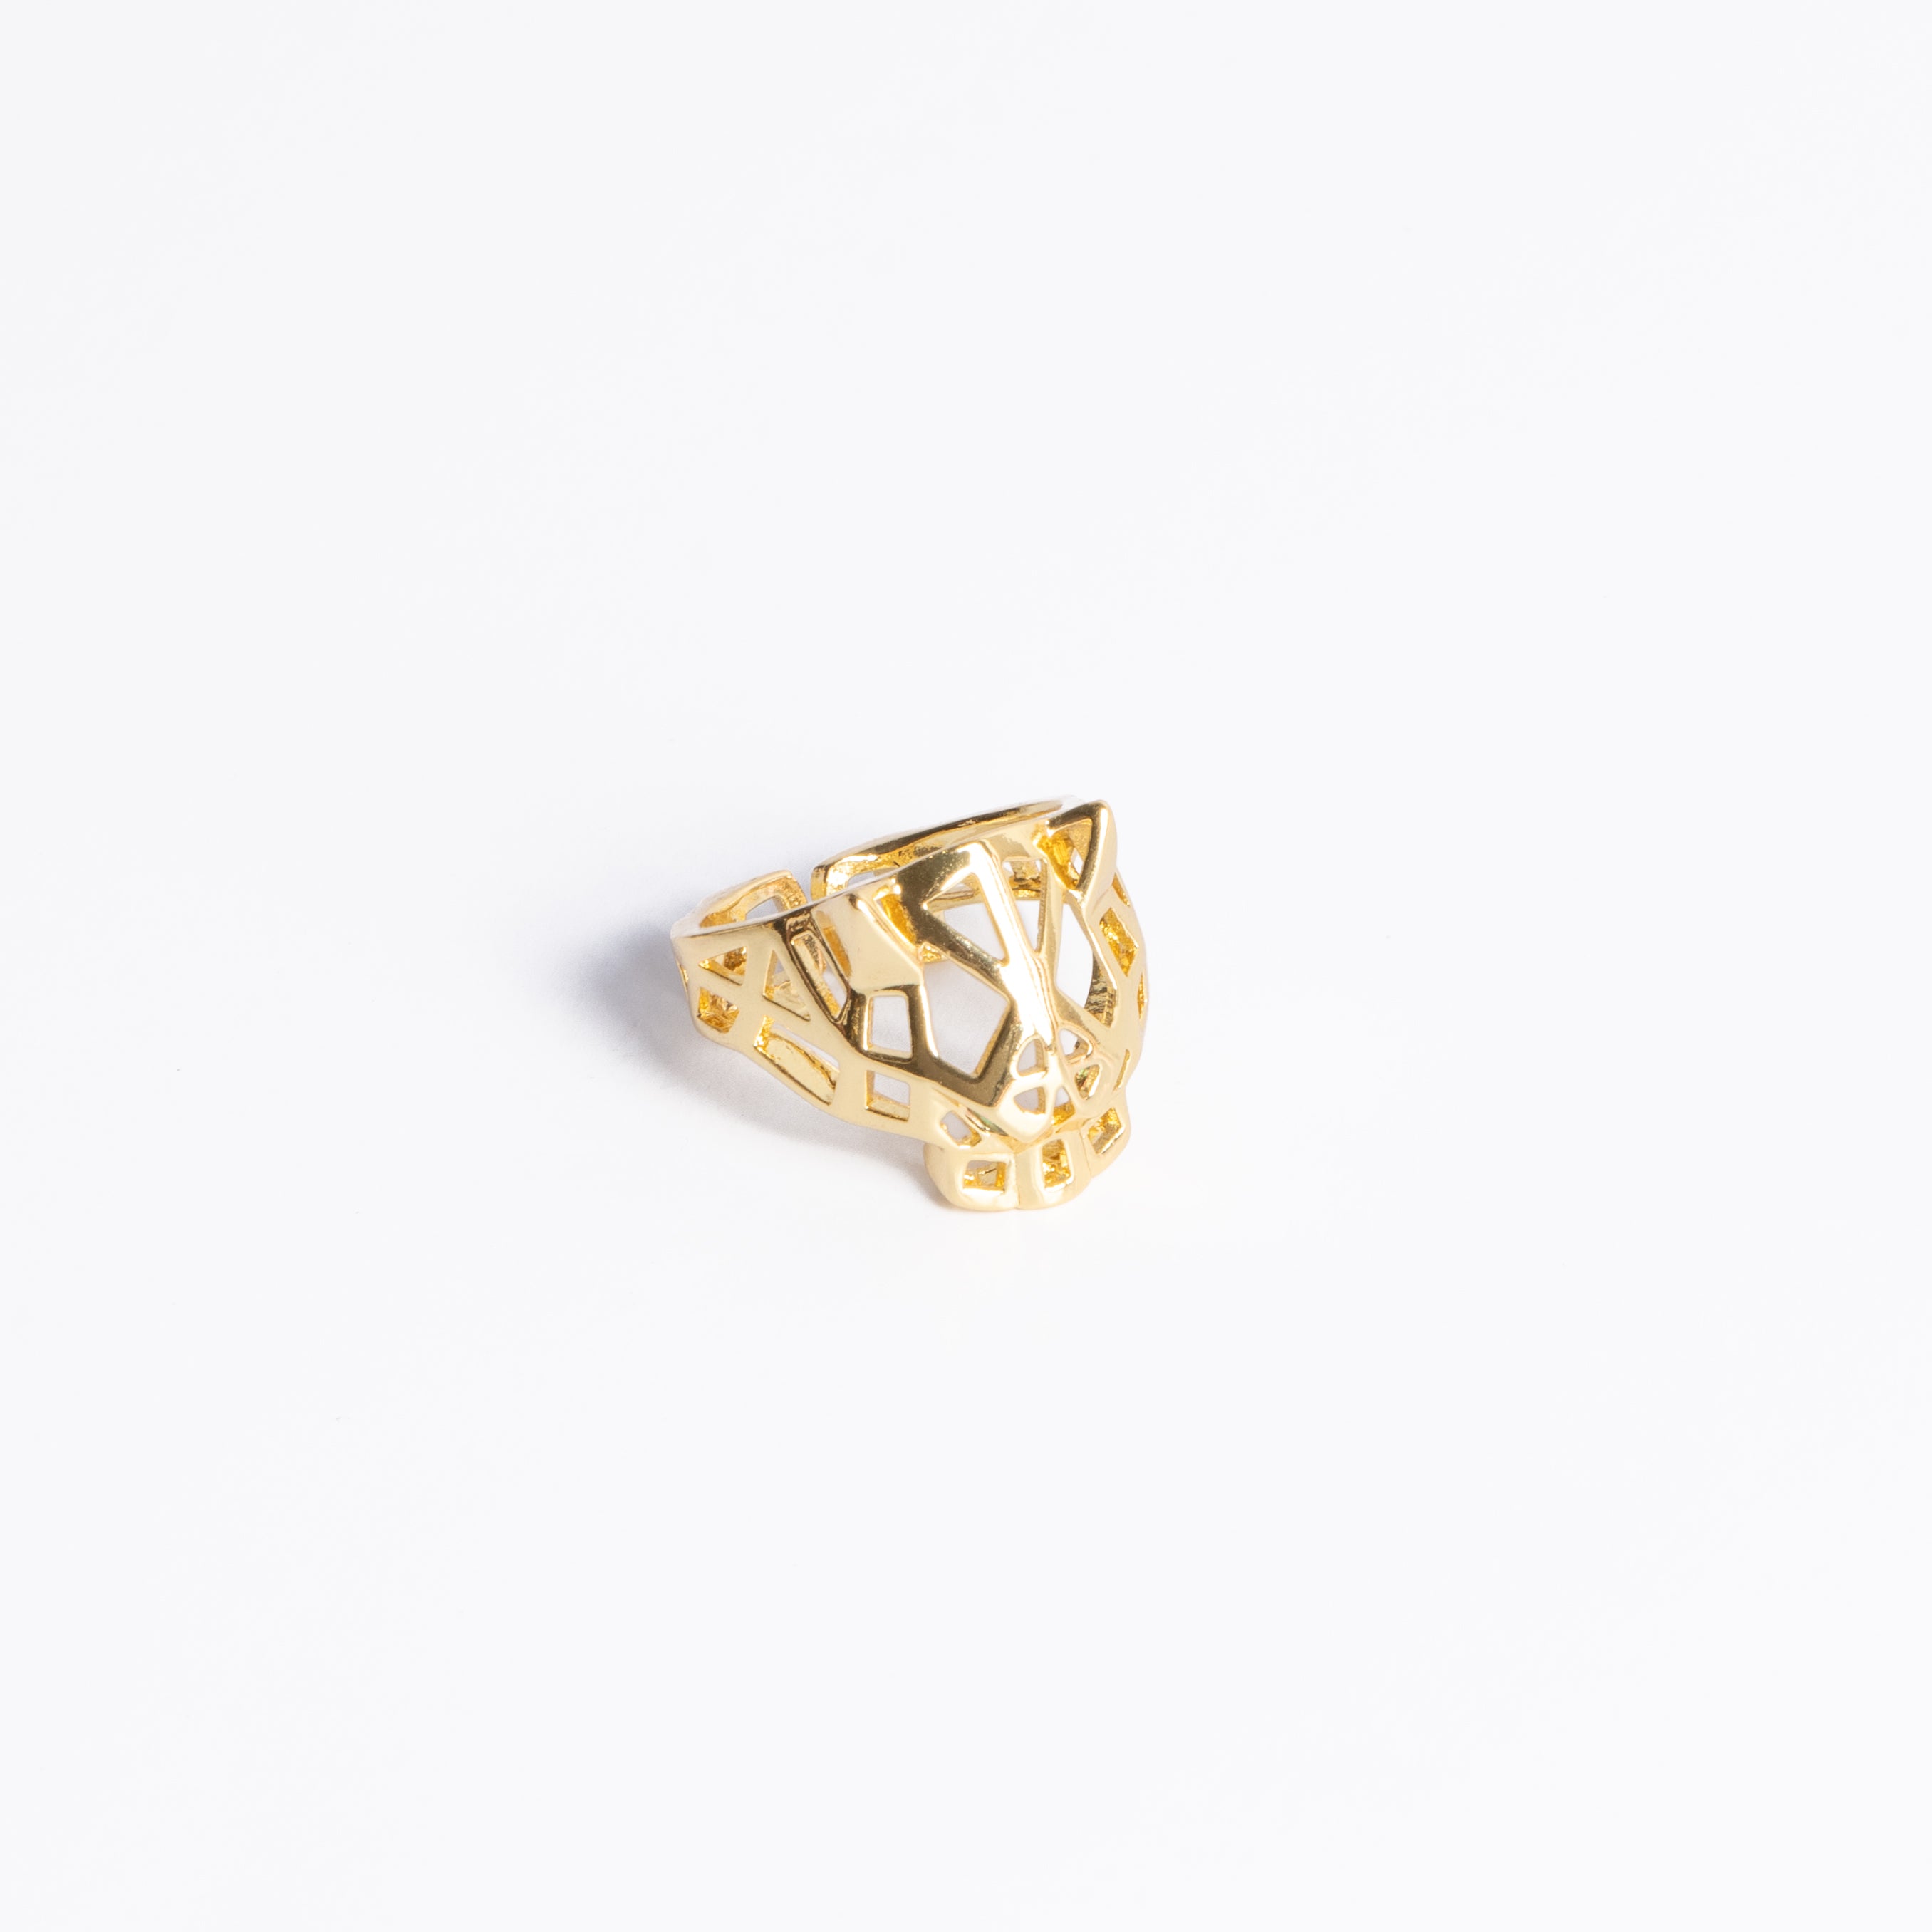 TIGERS OF GOLD RING